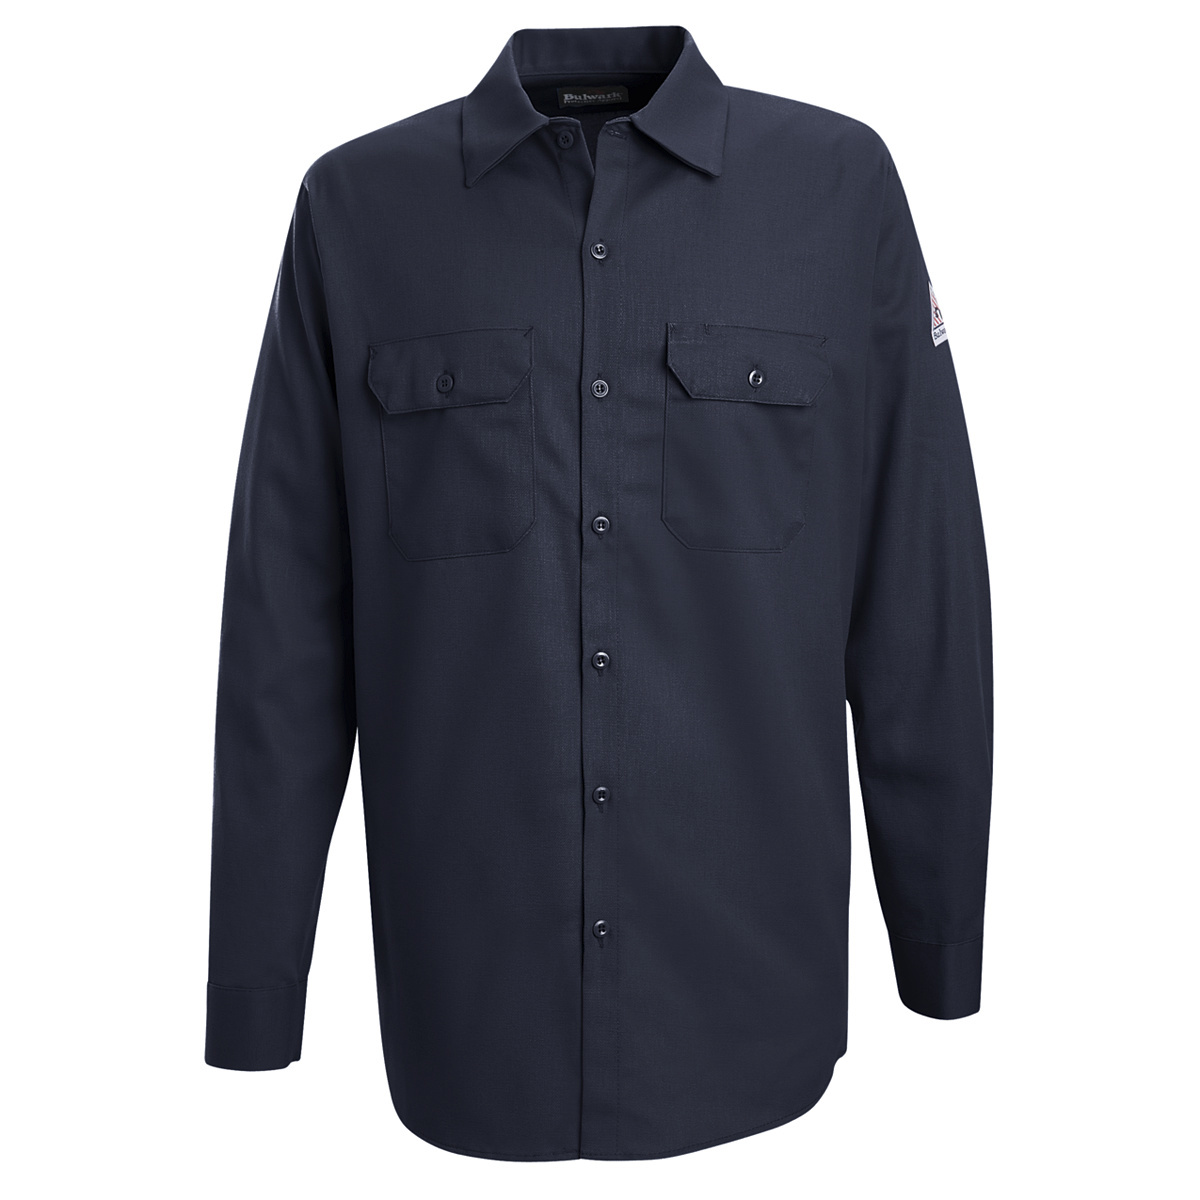 Bulwark® Large Tall Navy Blue EXCEL FR® Cotton Flame Resistant Work Shirt With Button Front Closure